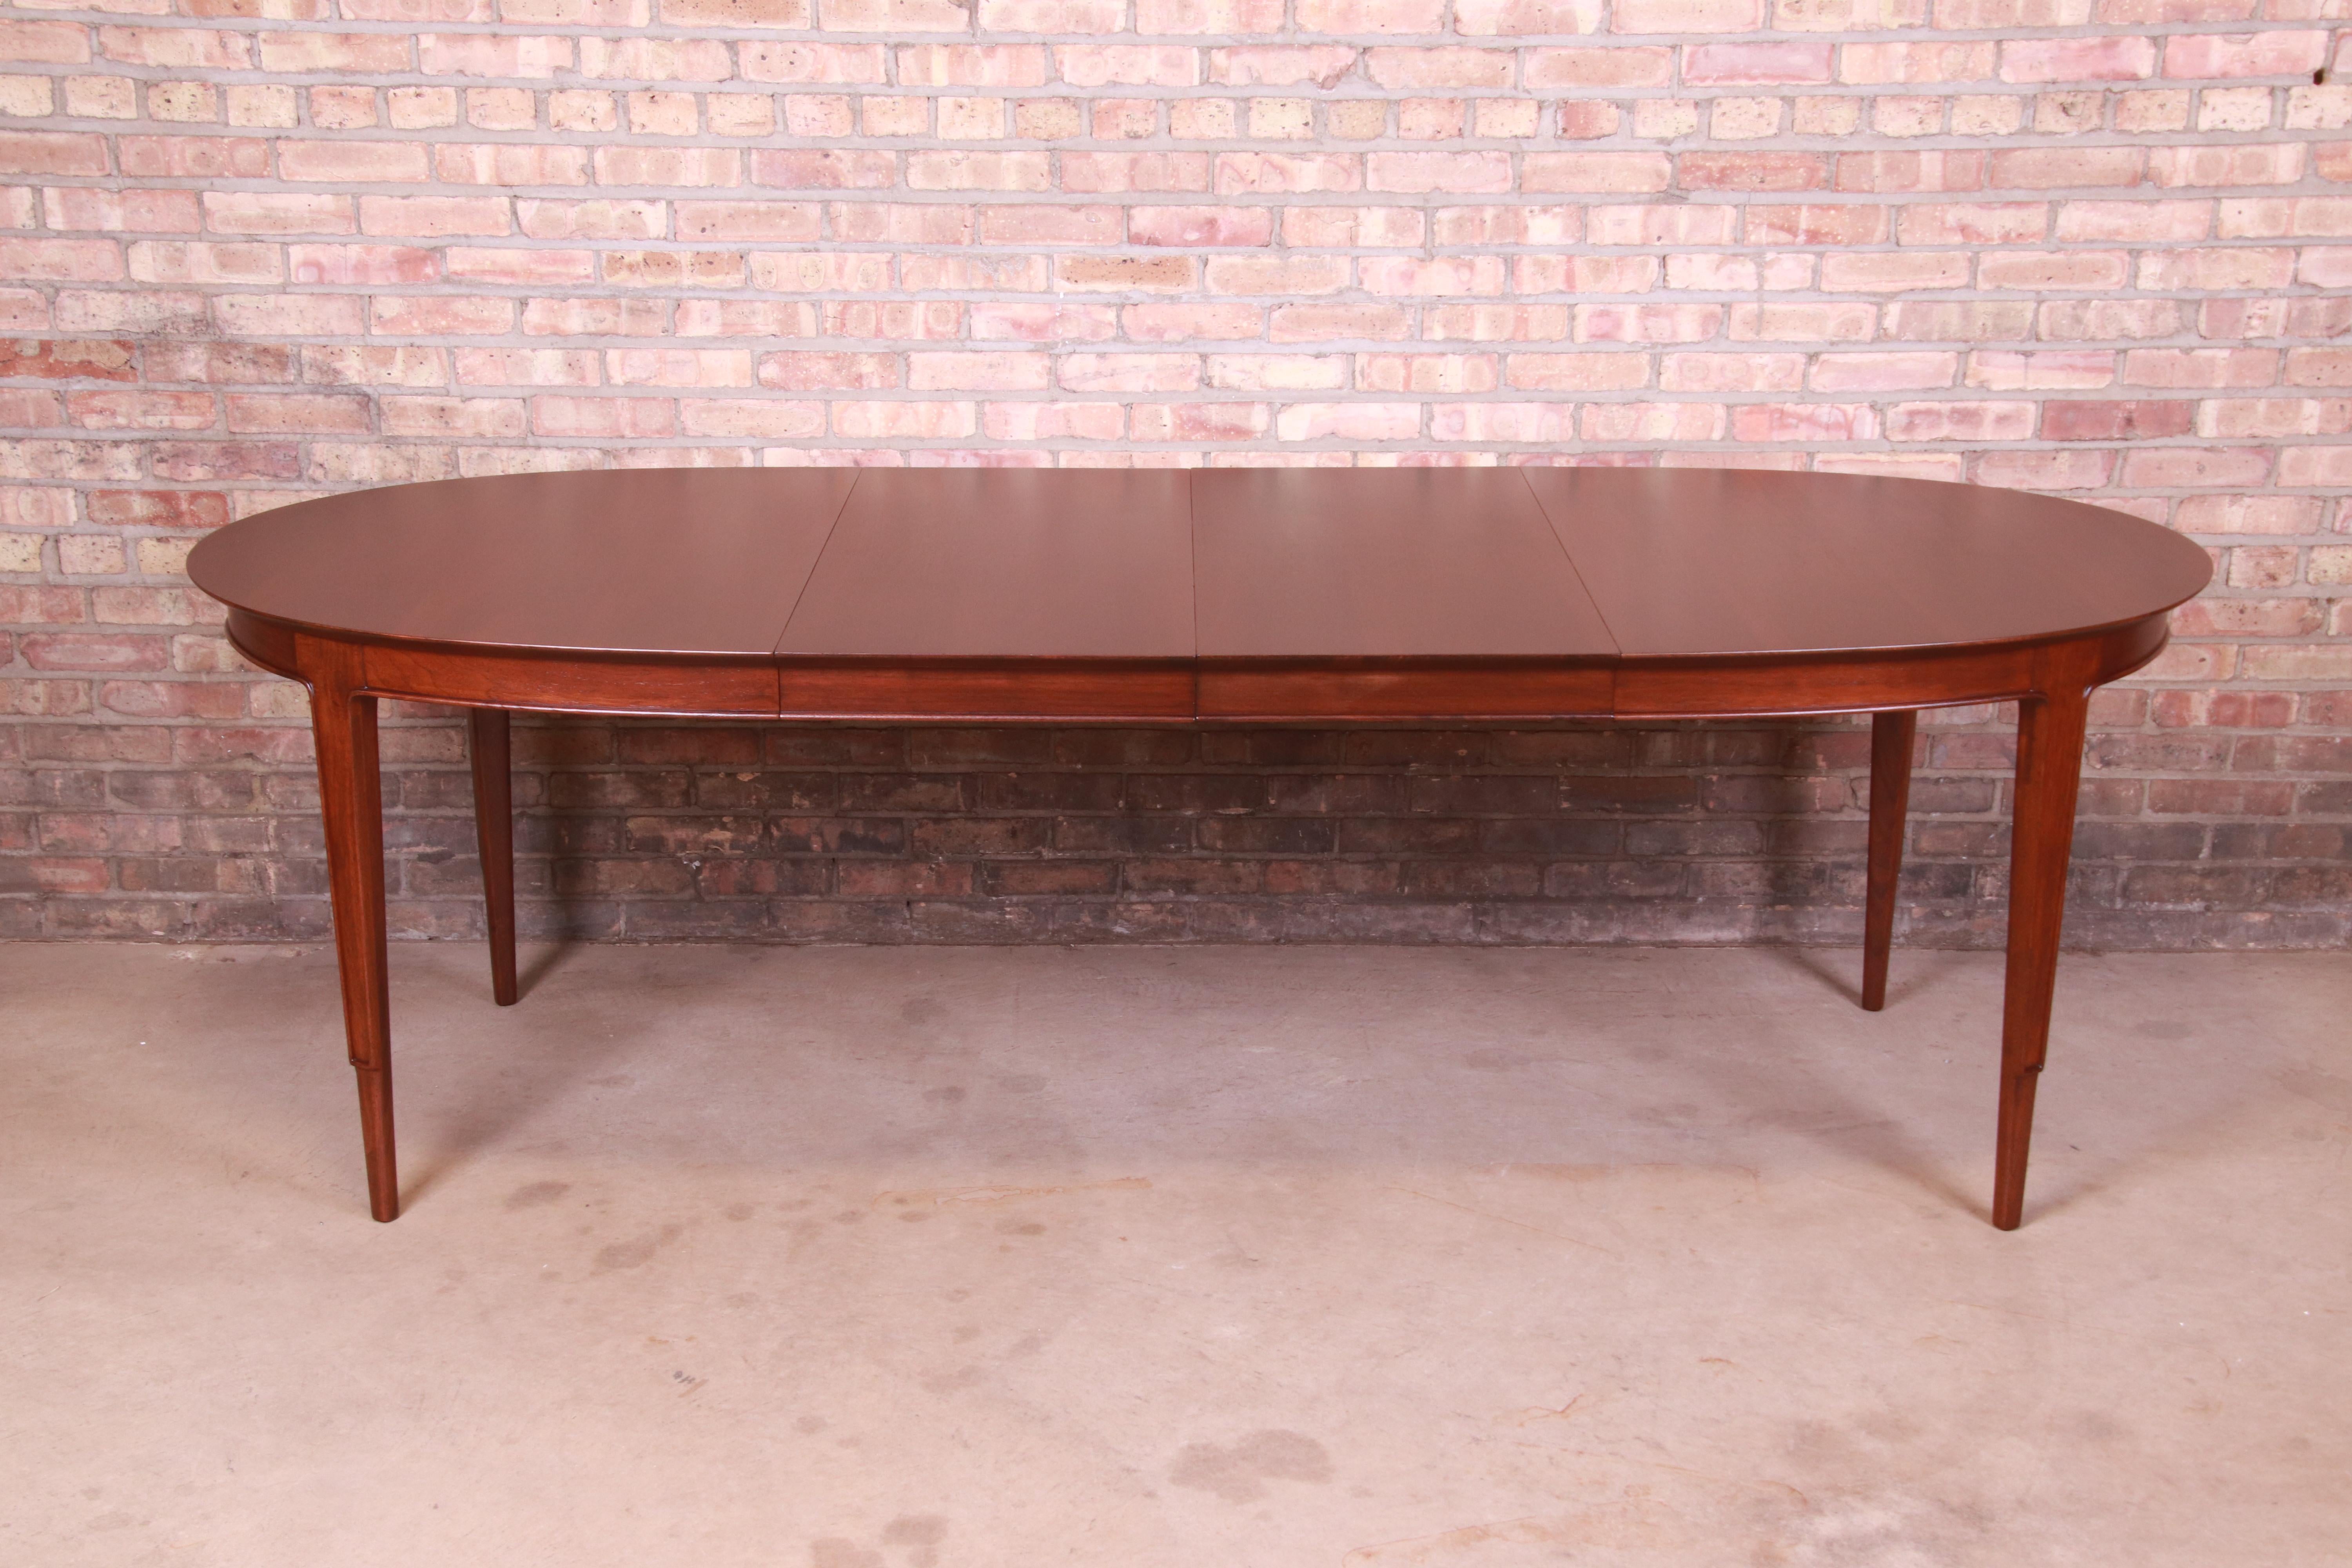 An exceptional Mid-Century Modern sculpted walnut oval extension dining table

By John Stuart, 